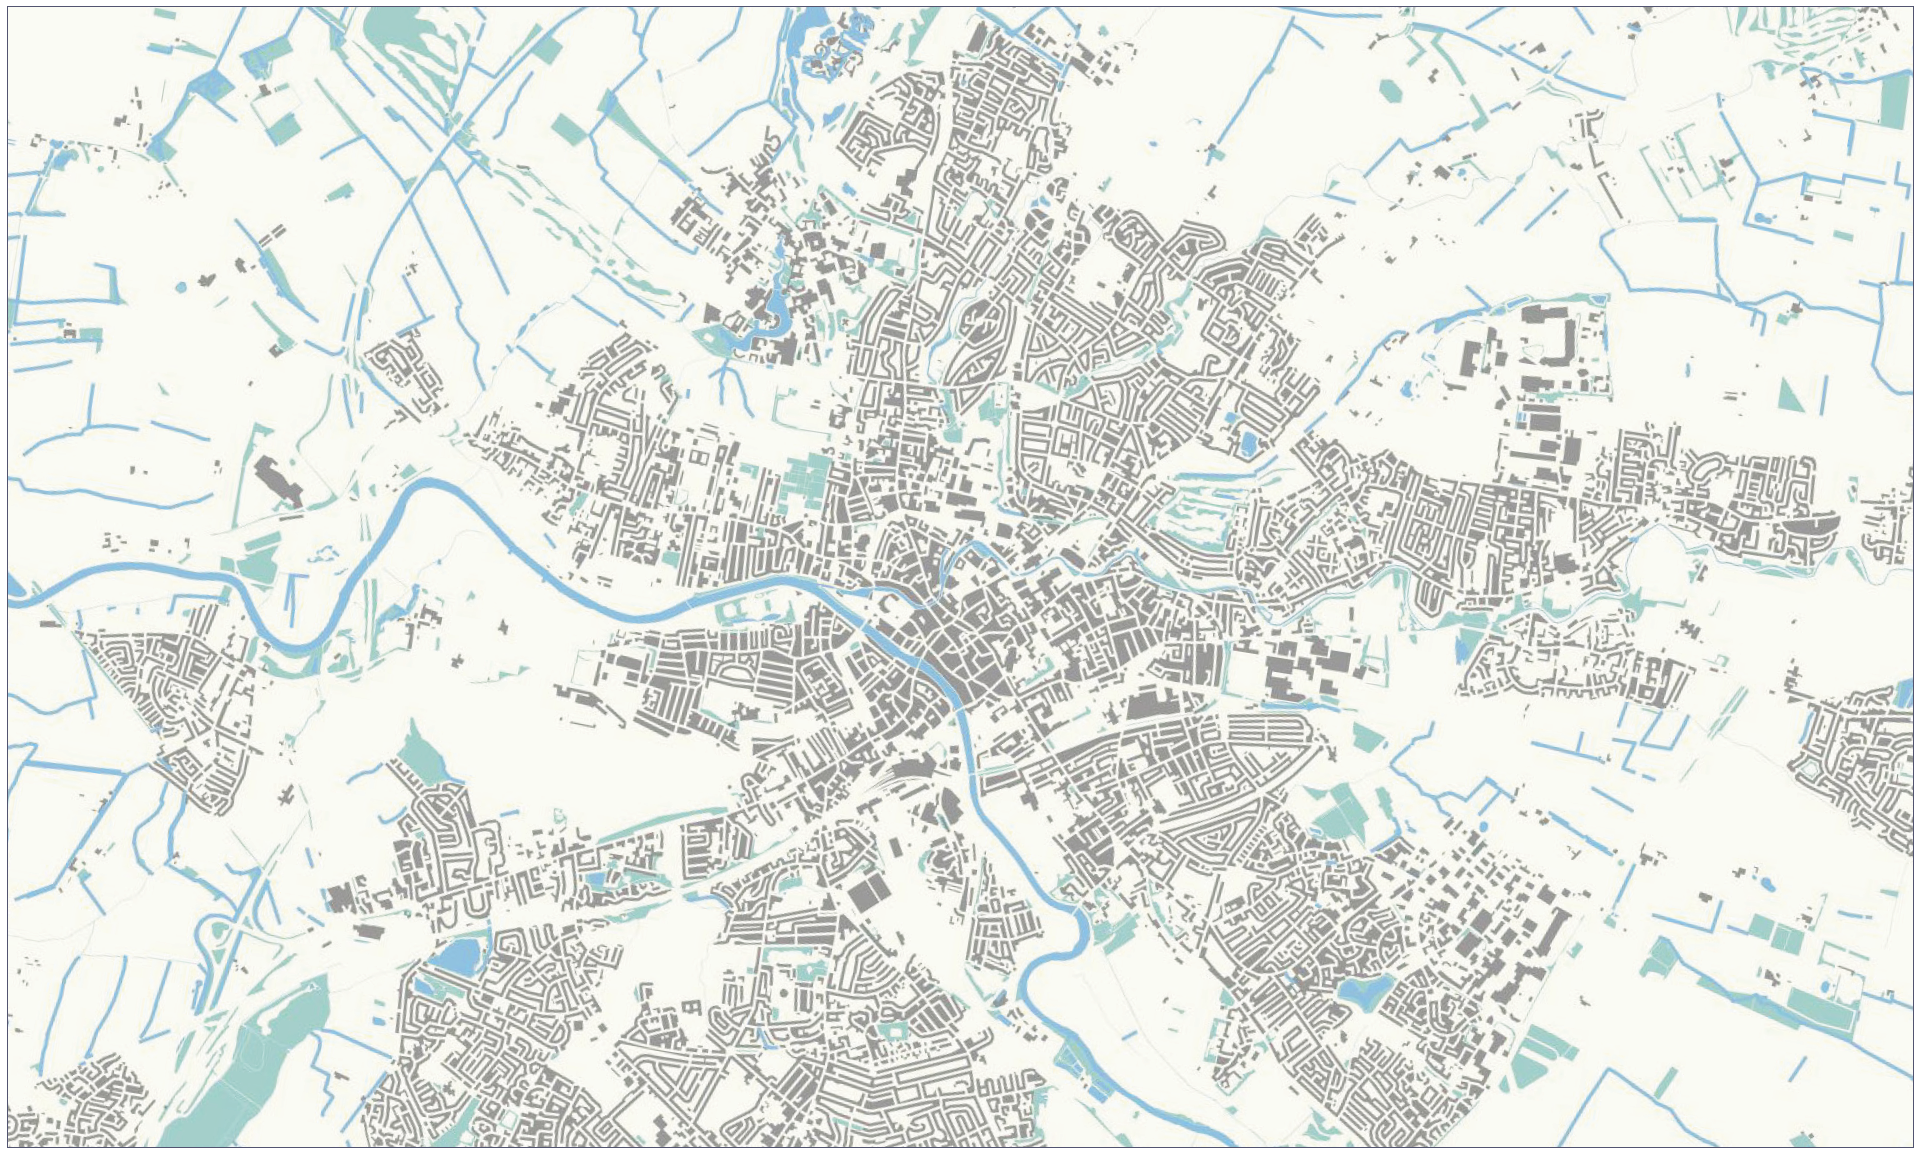 Shows a figure ground plan of a fictional mid-sized town. Buildings and structures (figure) are coloured in black, the surrounding area (ground) is left blank. In this version rivers and significant areas of green spaces have been added to show context.